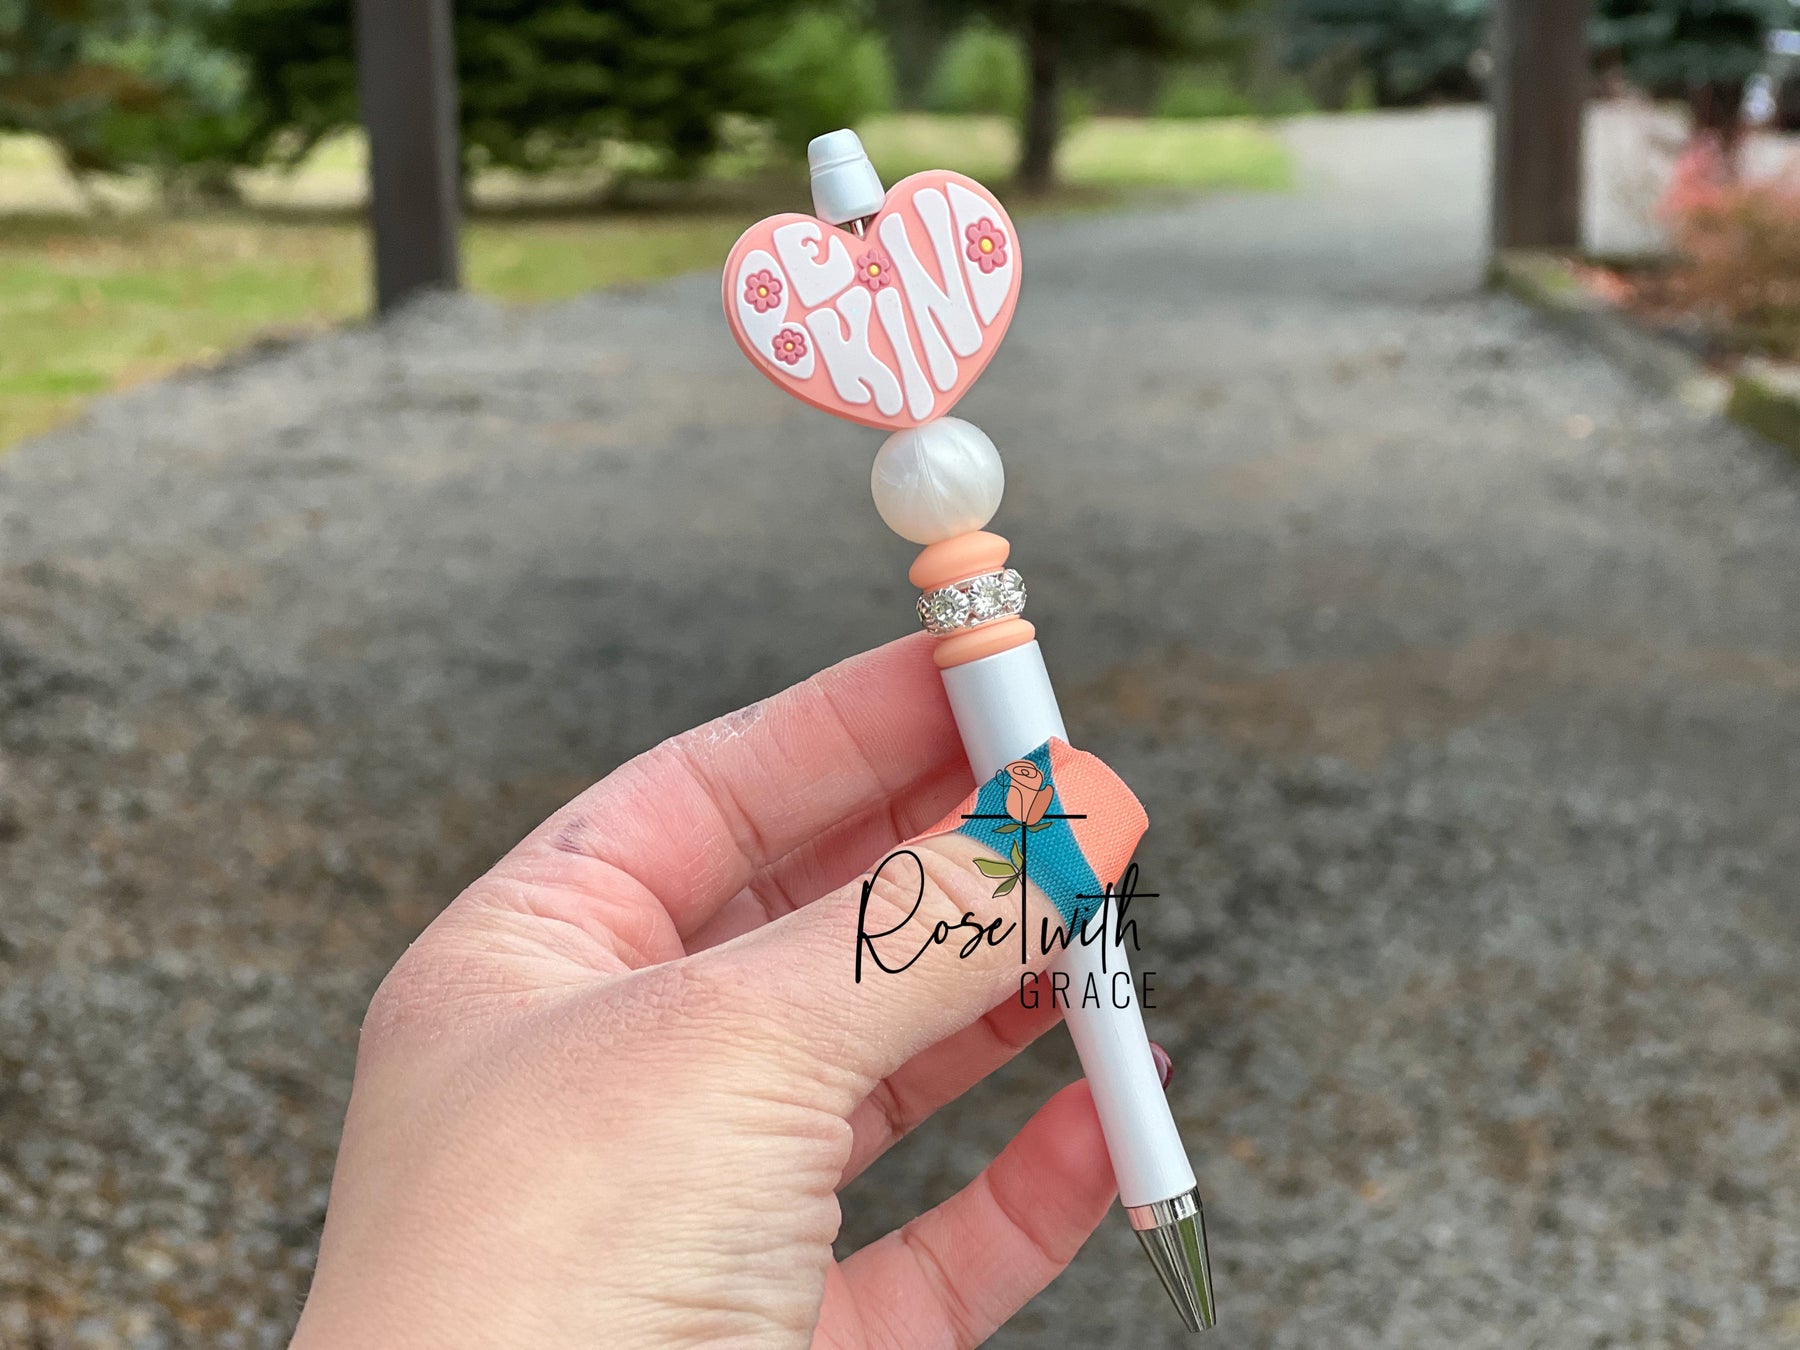 BE KIND PENS Rose with Grace LLC